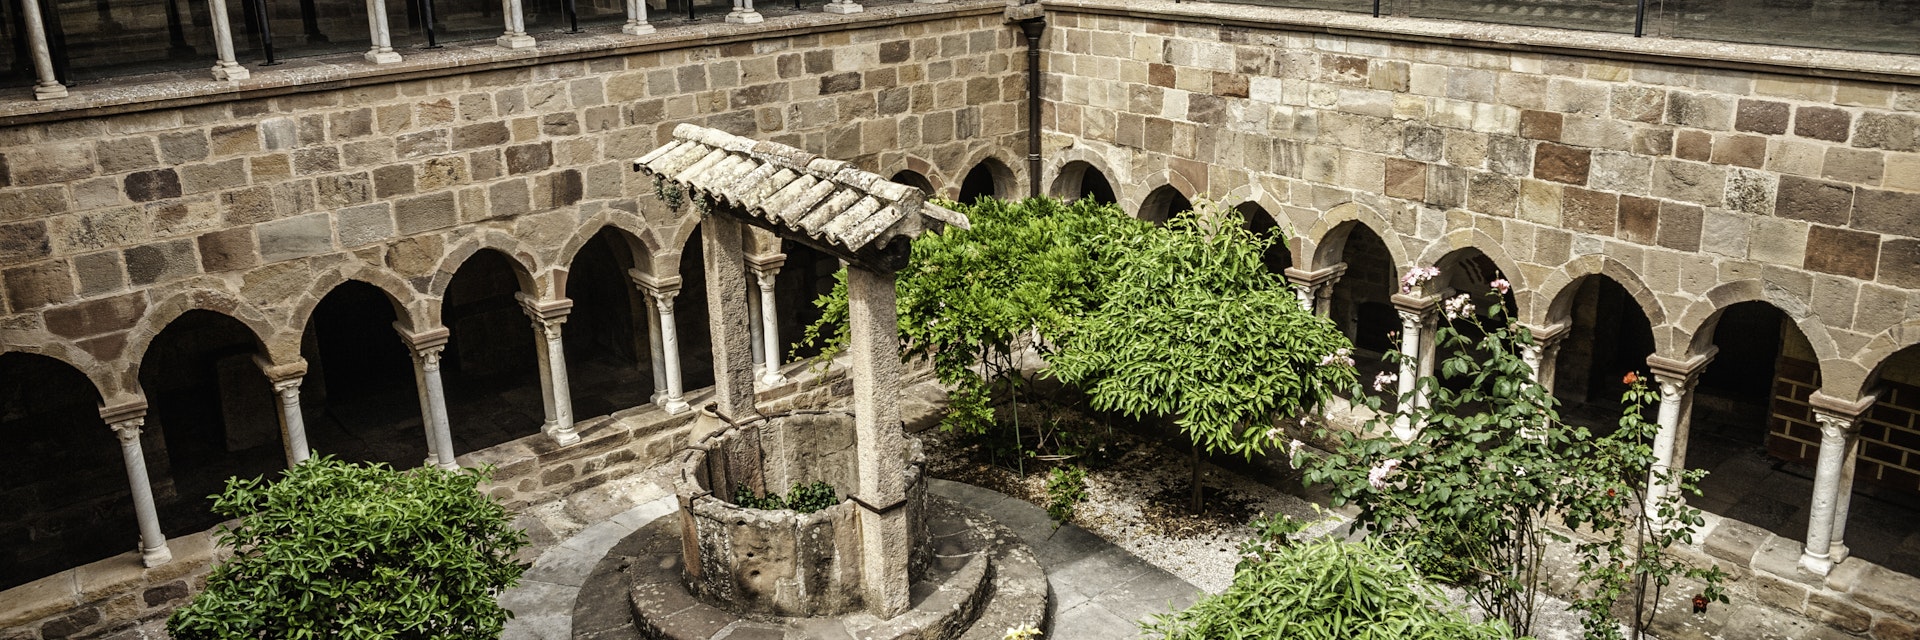 Cloister of the cathedral Saint-Leonce in Frejus, France.